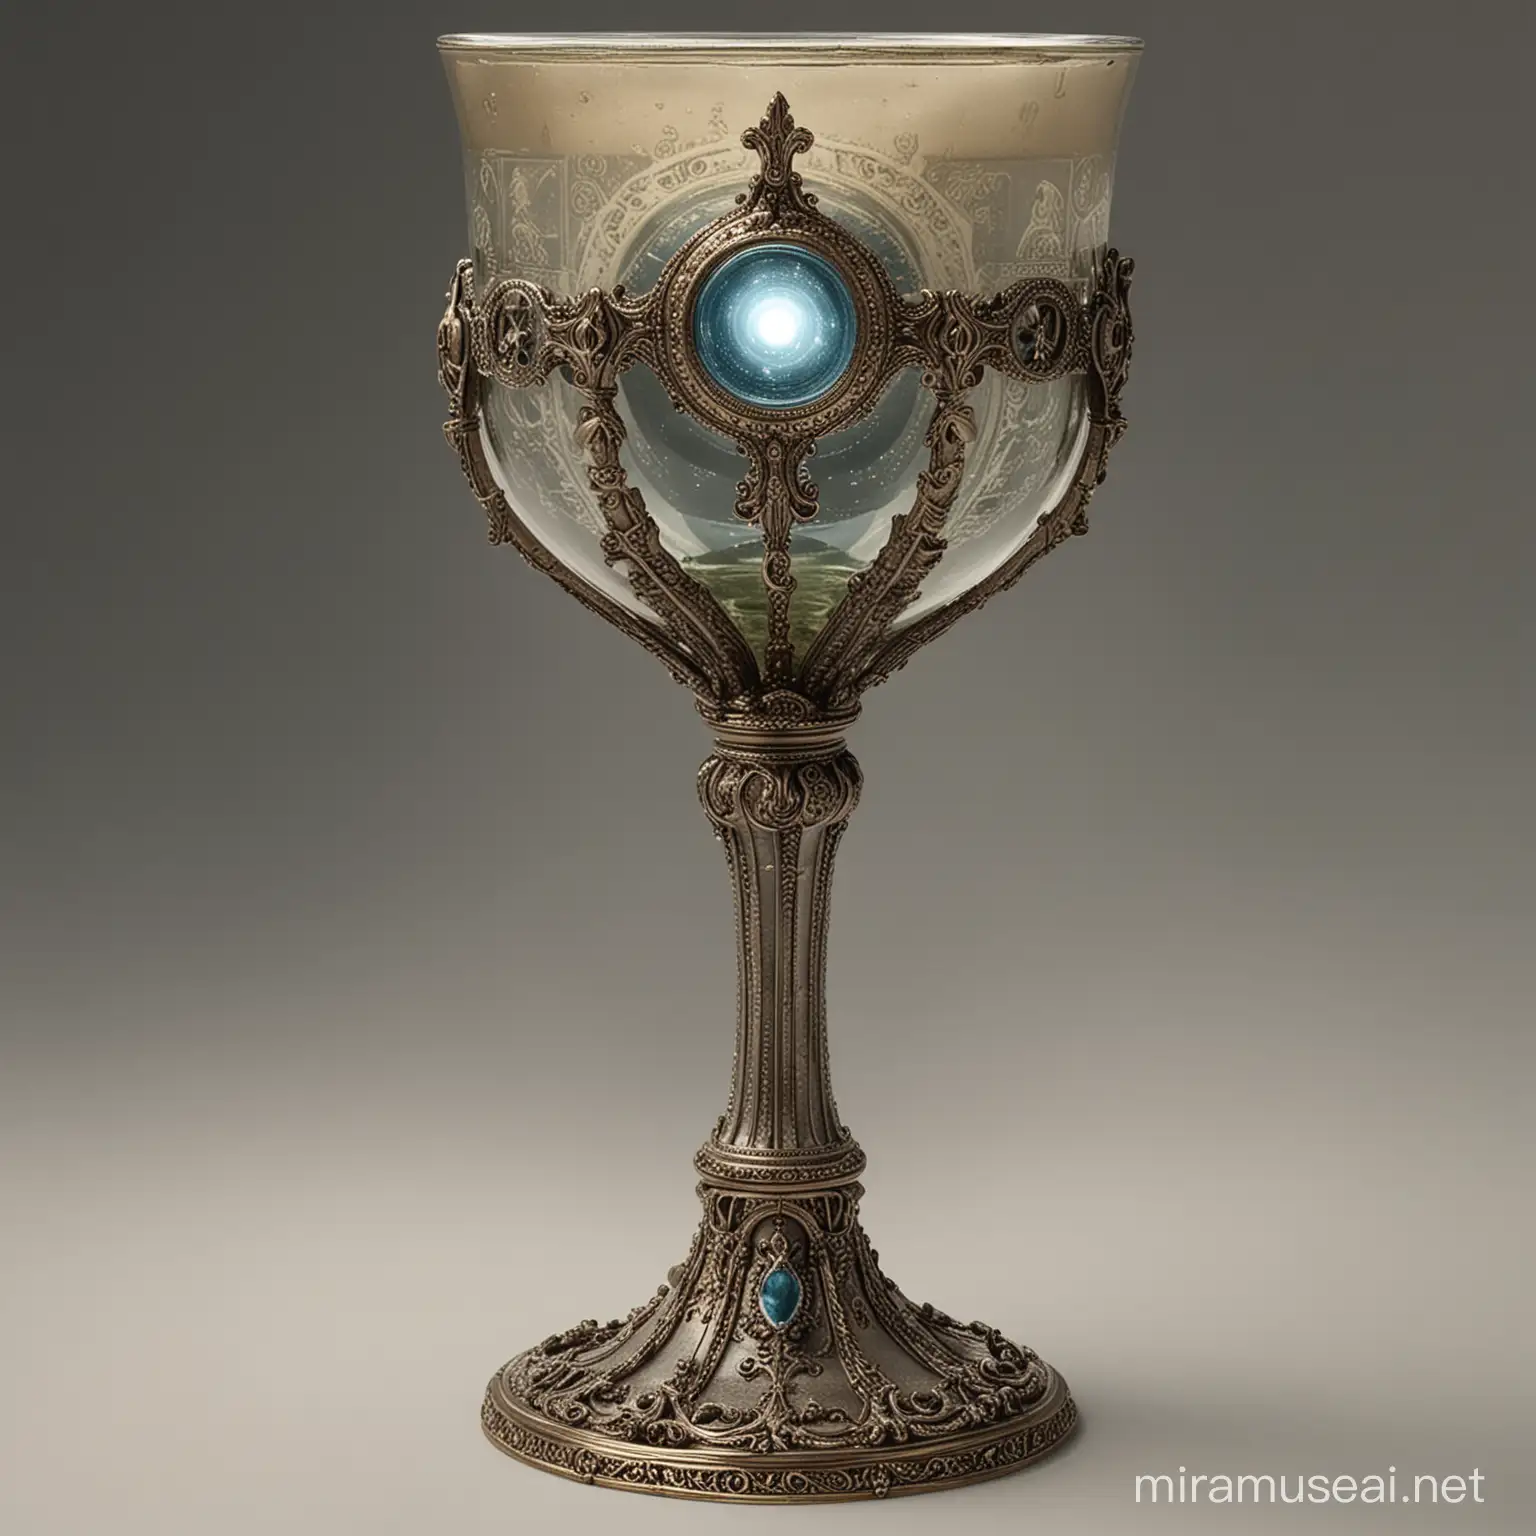 Ethereal Chalice Mystical Vessel Revealing Forgotten Histories